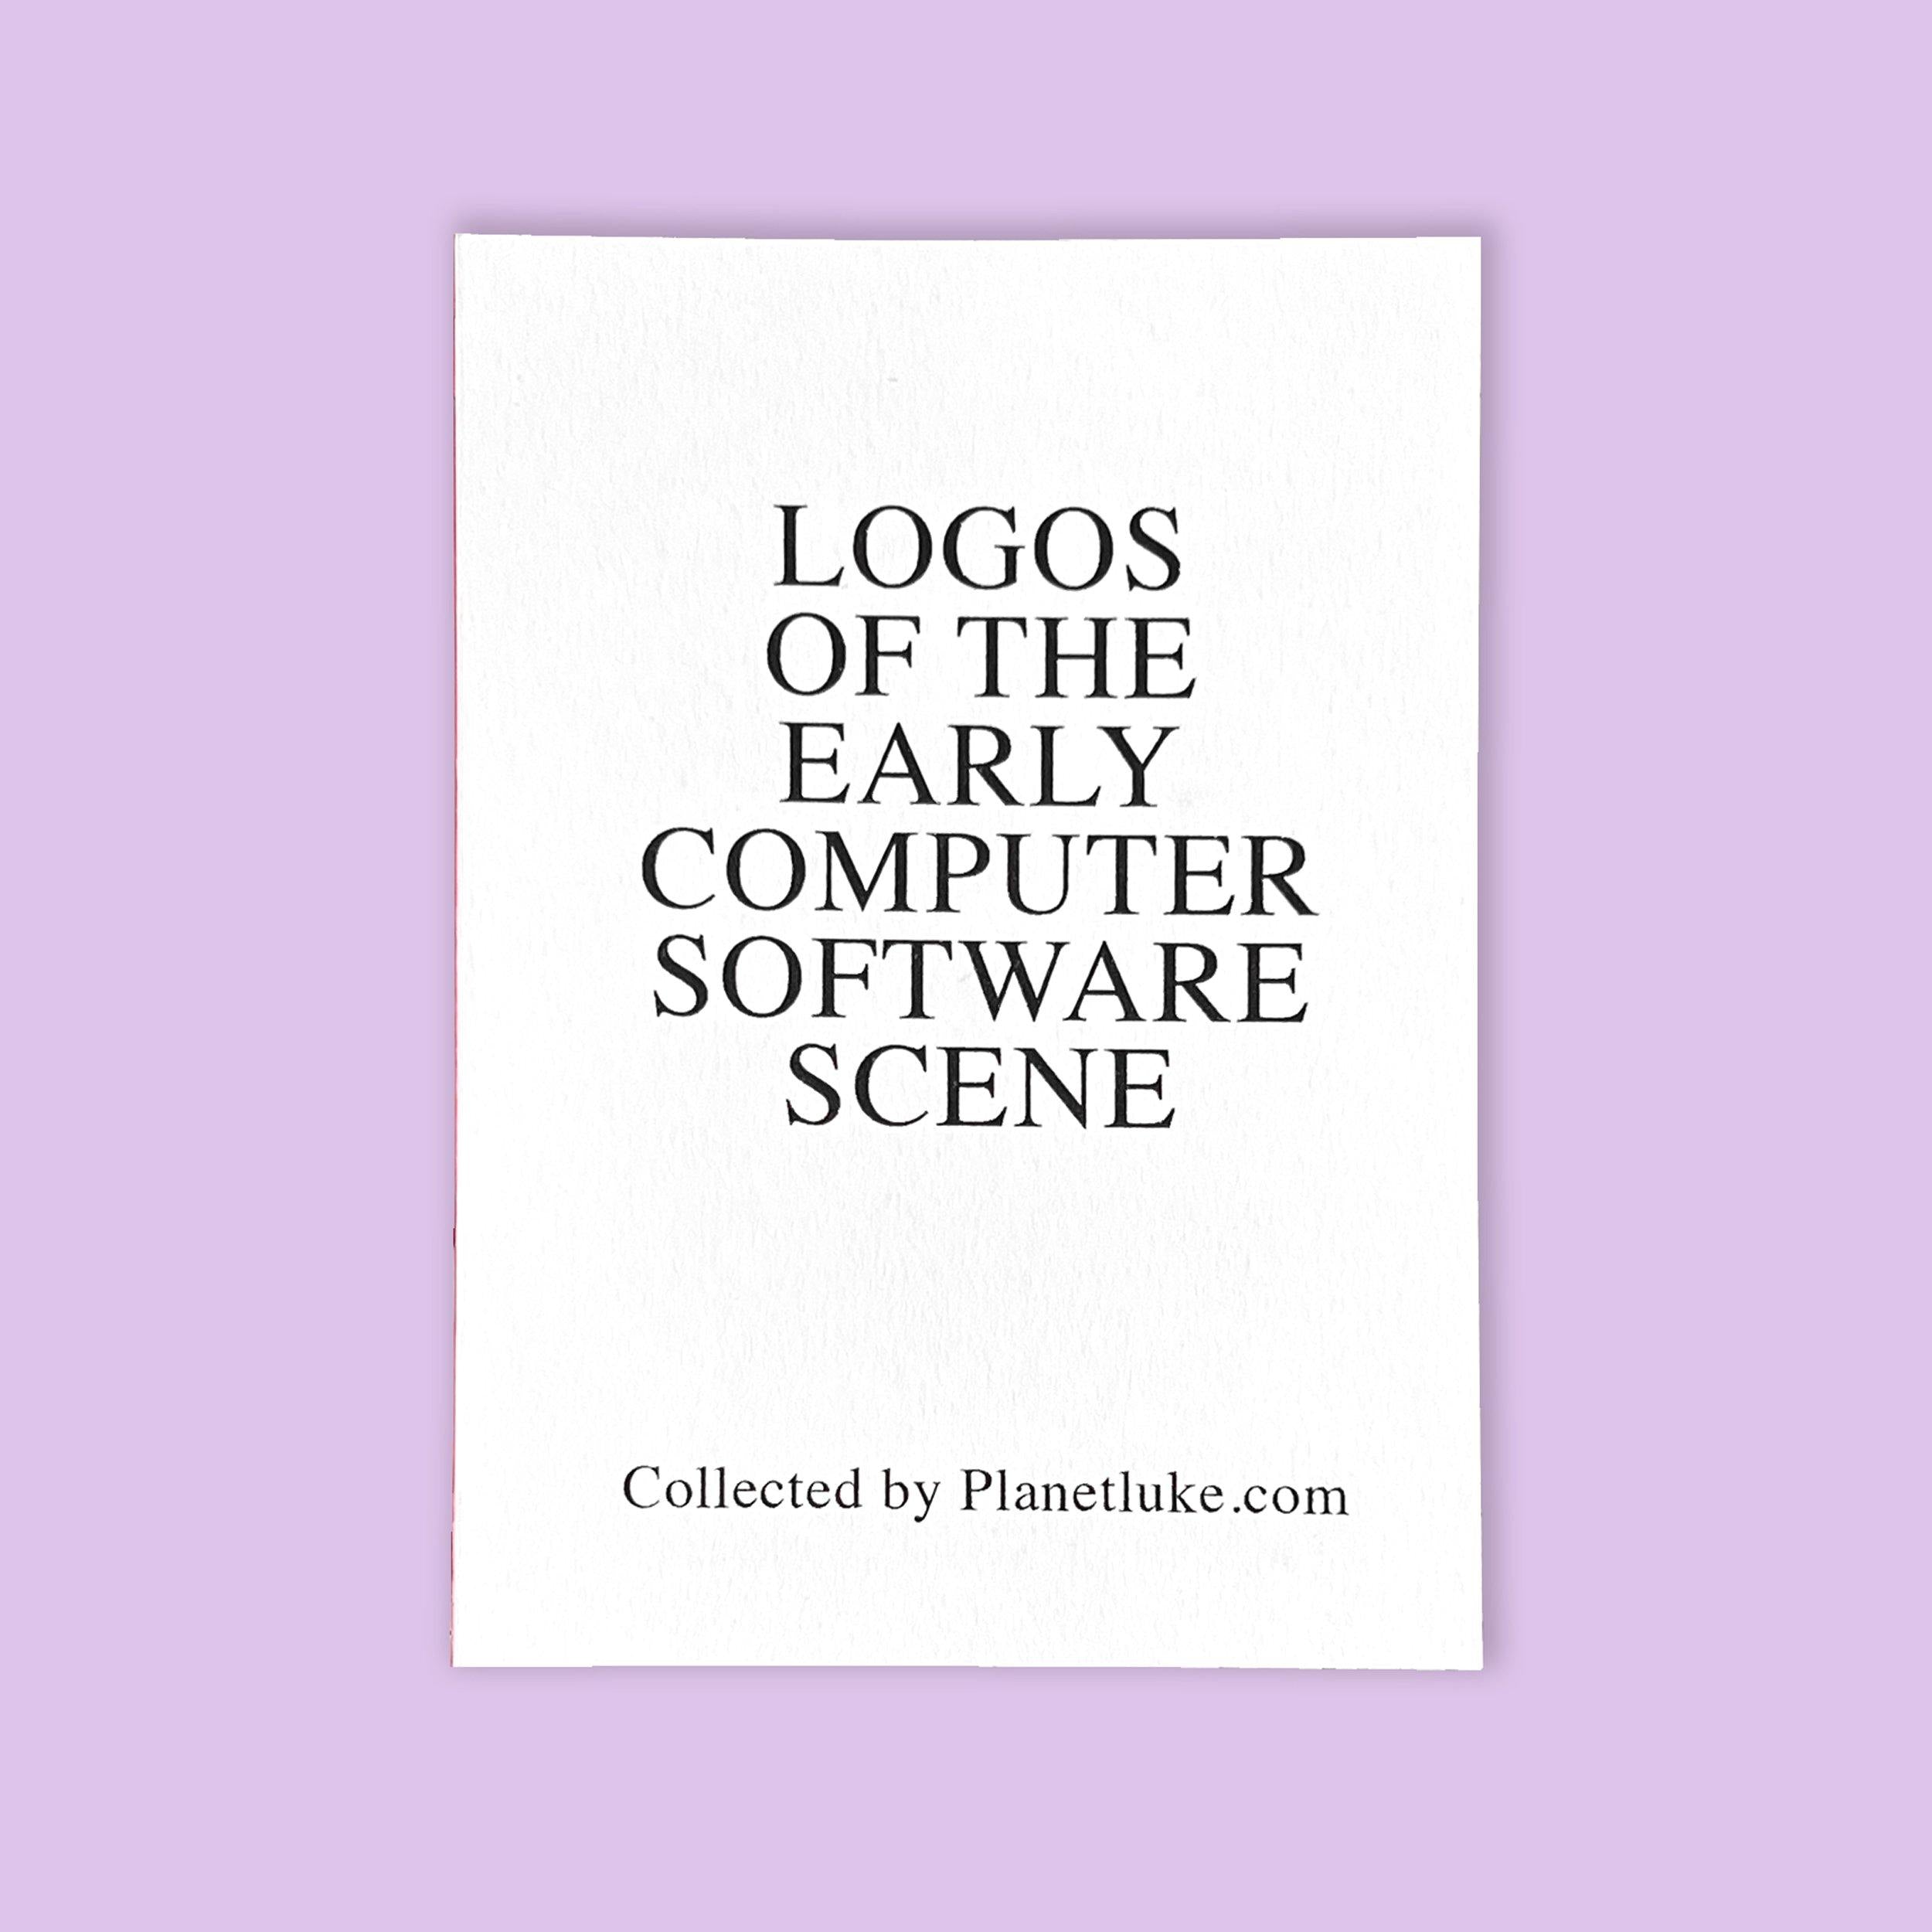 LOGOS OF THE EARLY COMPUTER SOFTWARE SCENE BY LUCA LUZANO